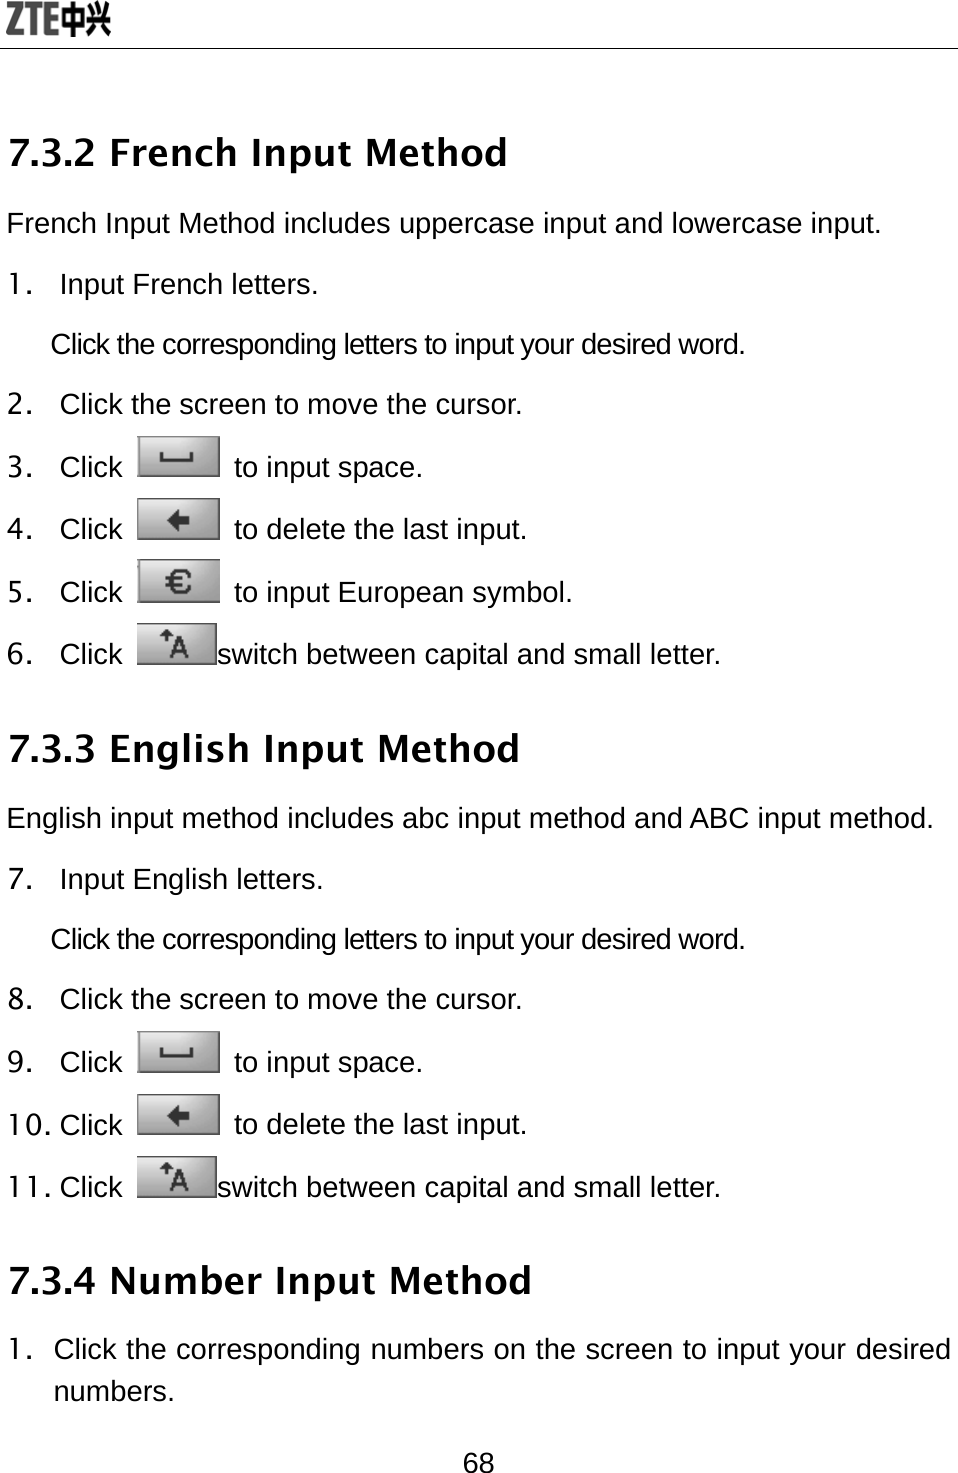  68 7.3.2 French Input Method French Input Method includes uppercase input and lowercase input. 1. Input French letters.  Click the corresponding letters to input your desired word. 2.  Click the screen to move the cursor. 3. Click   to input space. 4. Click    to delete the last input. 5. Click    to input European symbol. 6. Click  switch between capital and small letter. 7.3.3 English Input Method English input method includes abc input method and ABC input method. 7.  Input English letters.  Click the corresponding letters to input your desired word. 8.  Click the screen to move the cursor. 9. Click   to input space. 10. Click    to delete the last input. 11. Click  switch between capital and small letter. 7.3.4 Number Input Method 1.  Click the corresponding numbers on the screen to input your desired numbers. 